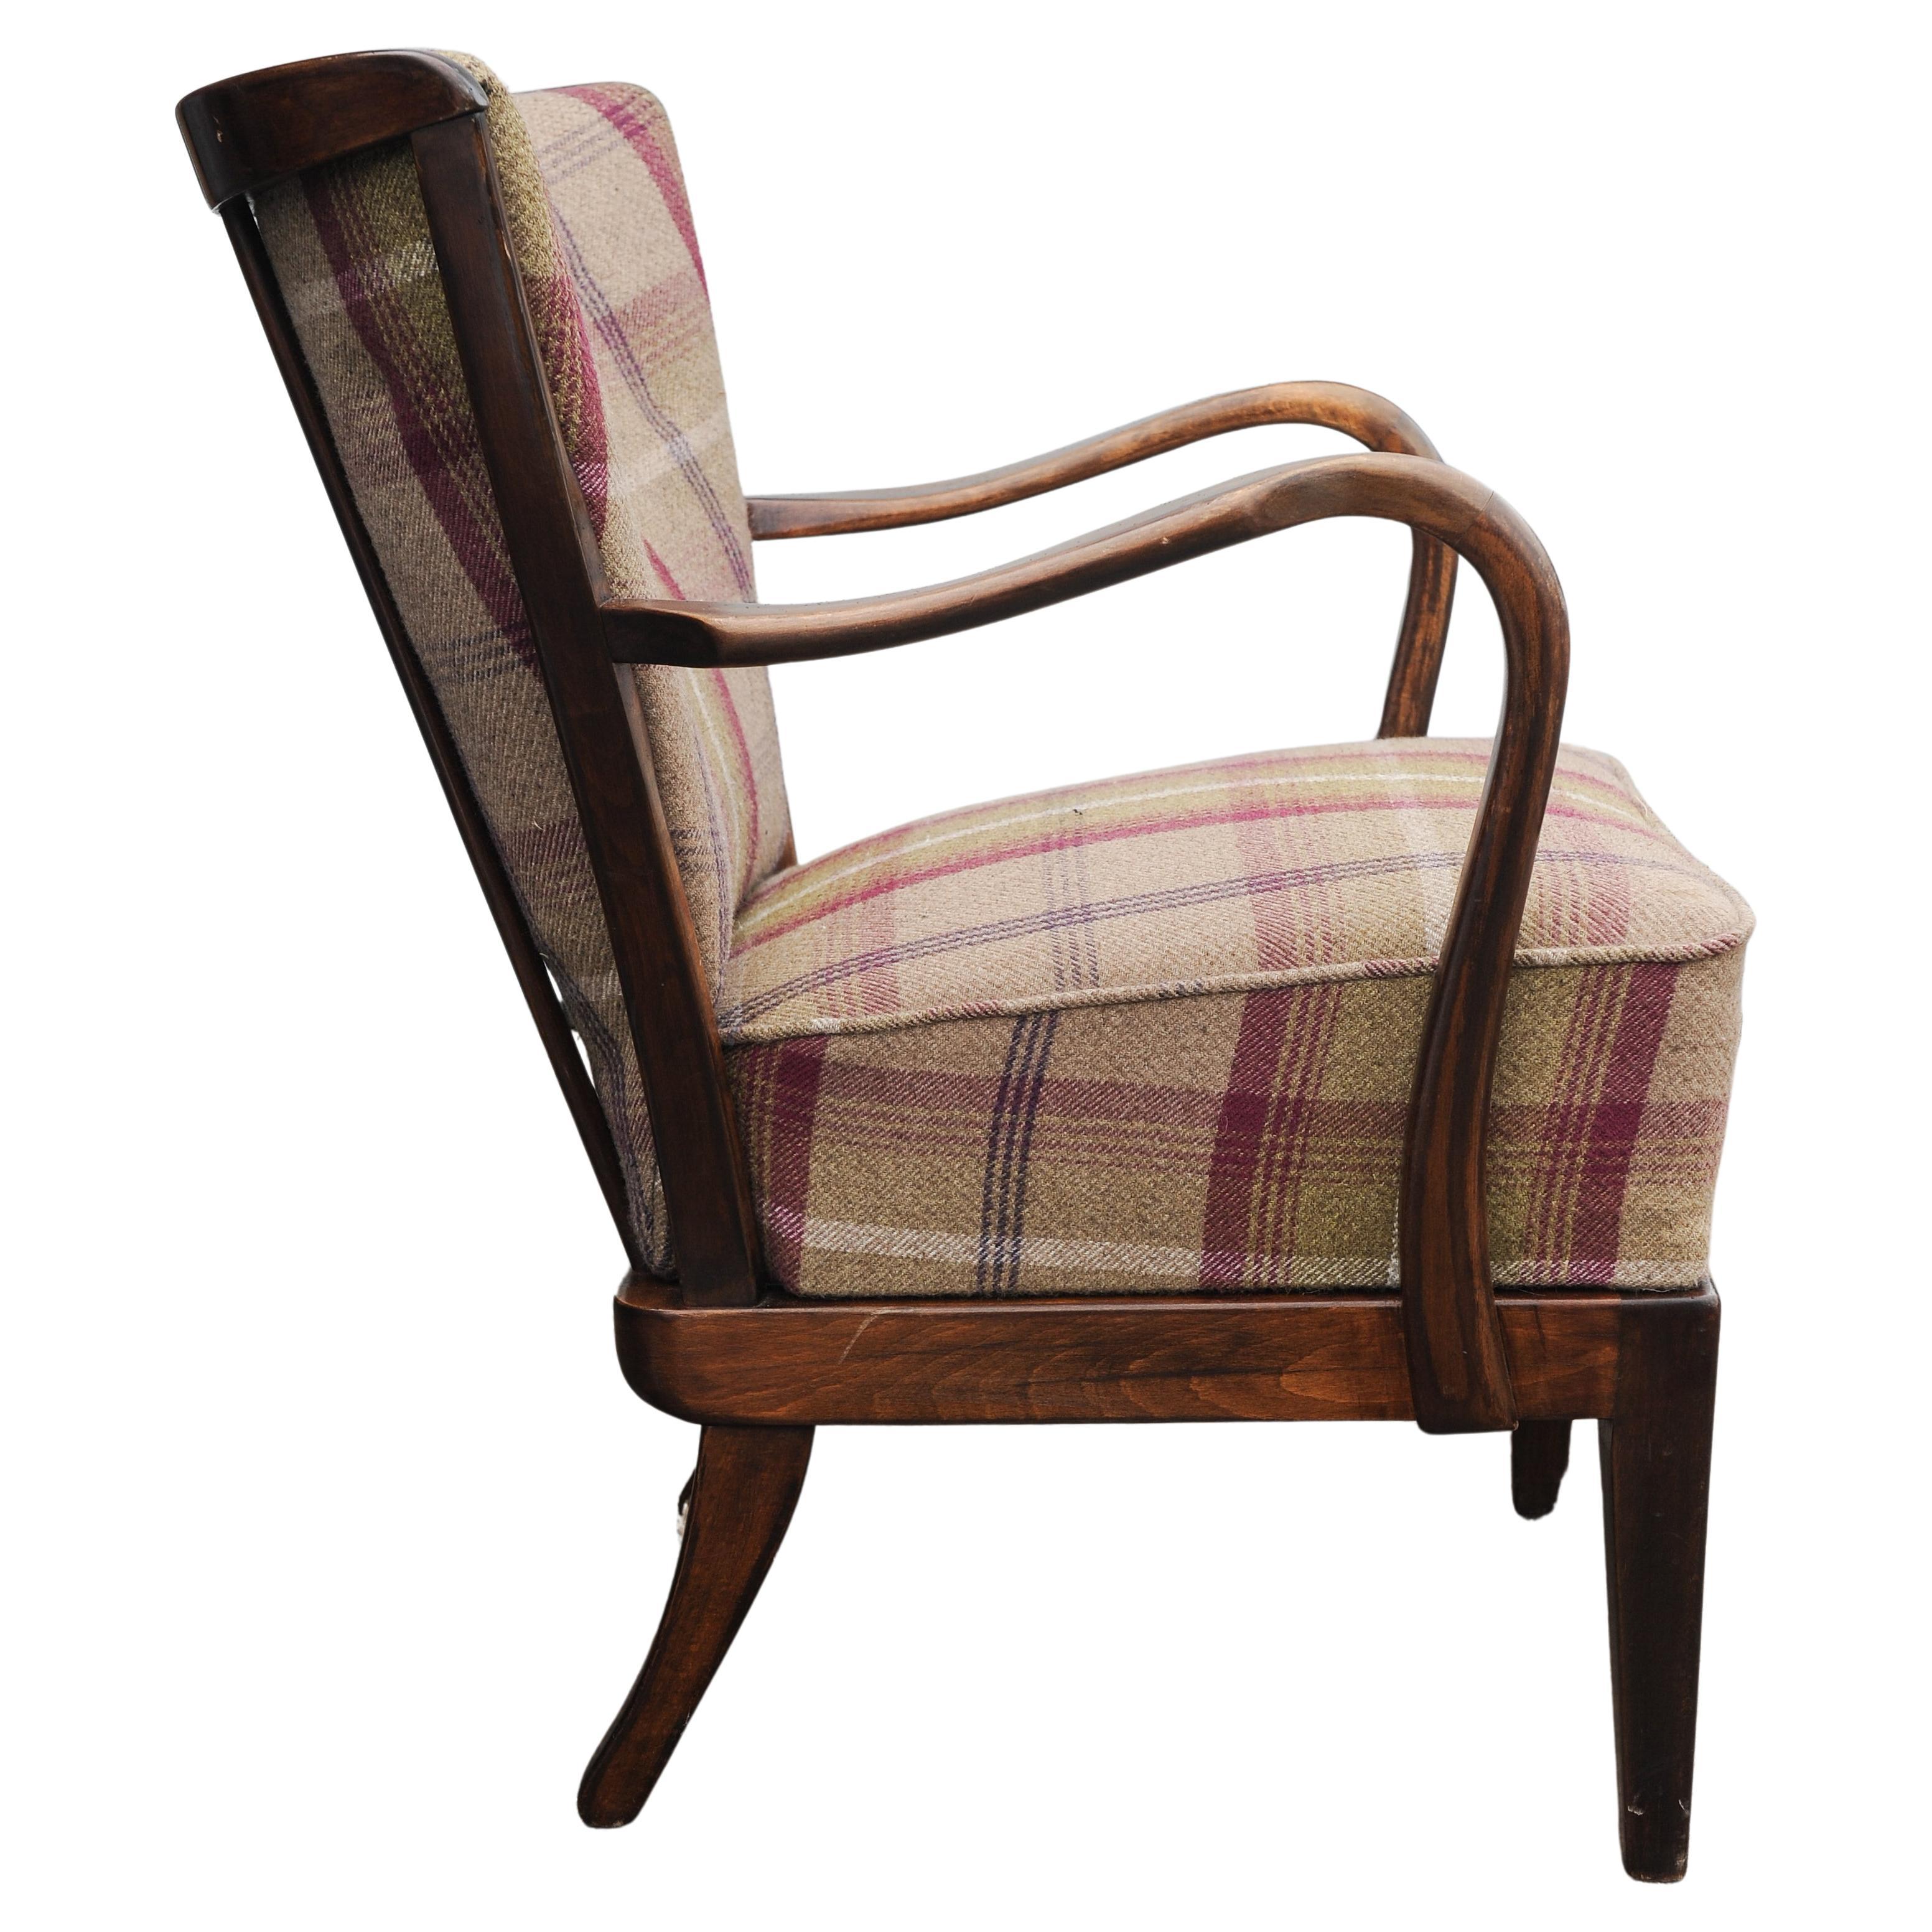 20th Century 1940's Fritz Hansen Art Deco Oak Bentwood Armchair with Wool Plaid Upholstery  For Sale